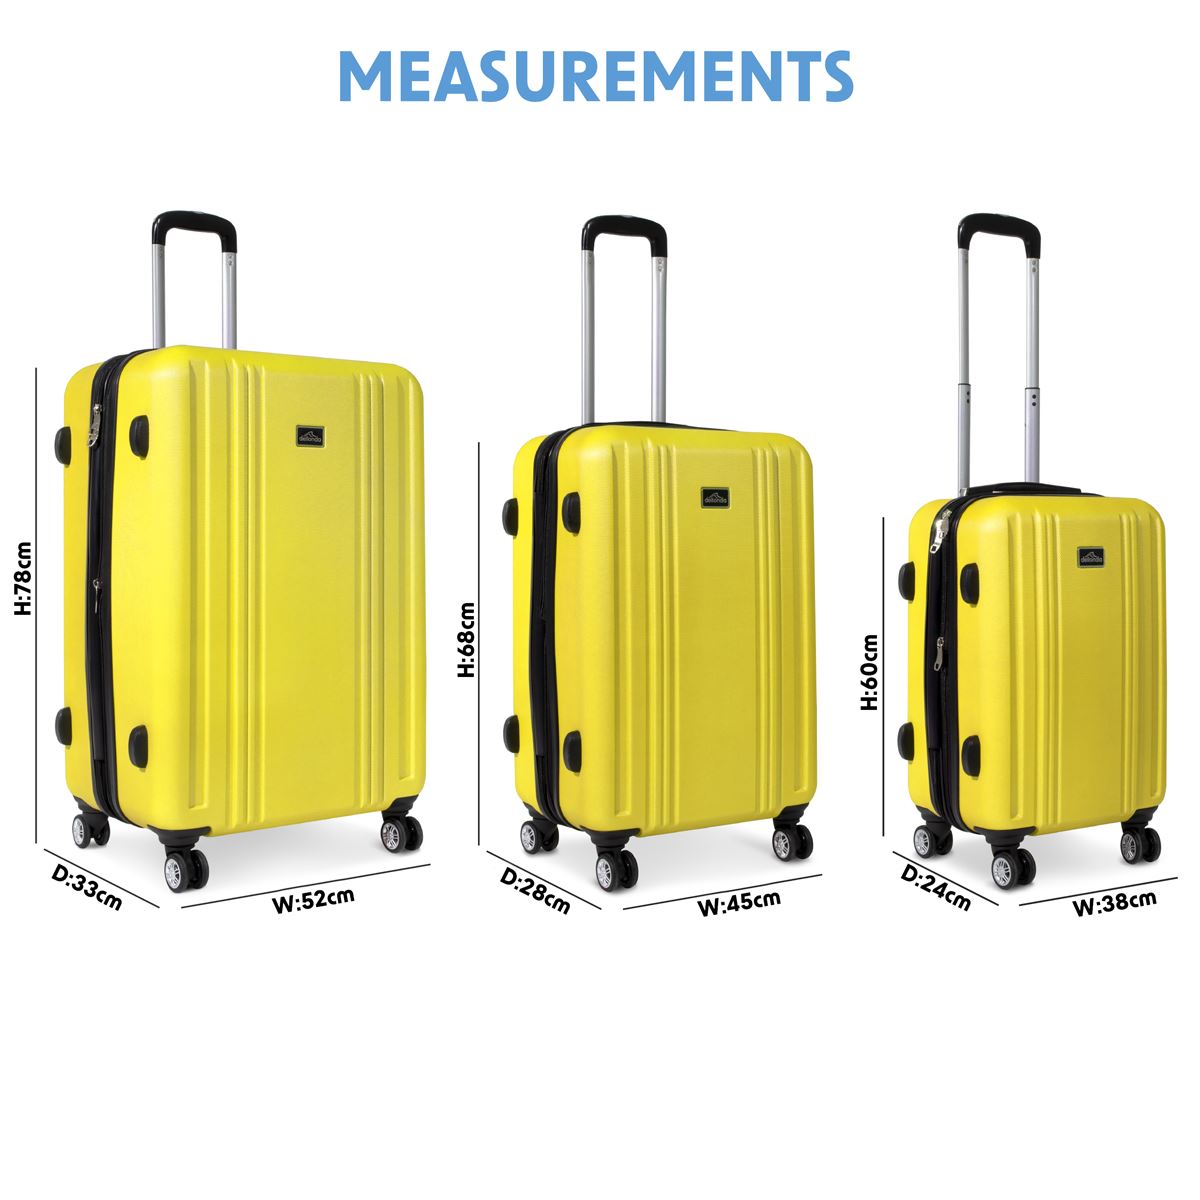 Dellonda 3-Piece ABS Luggage Set with Integrated TSA Approved Combination Lock - Yellow - DL124